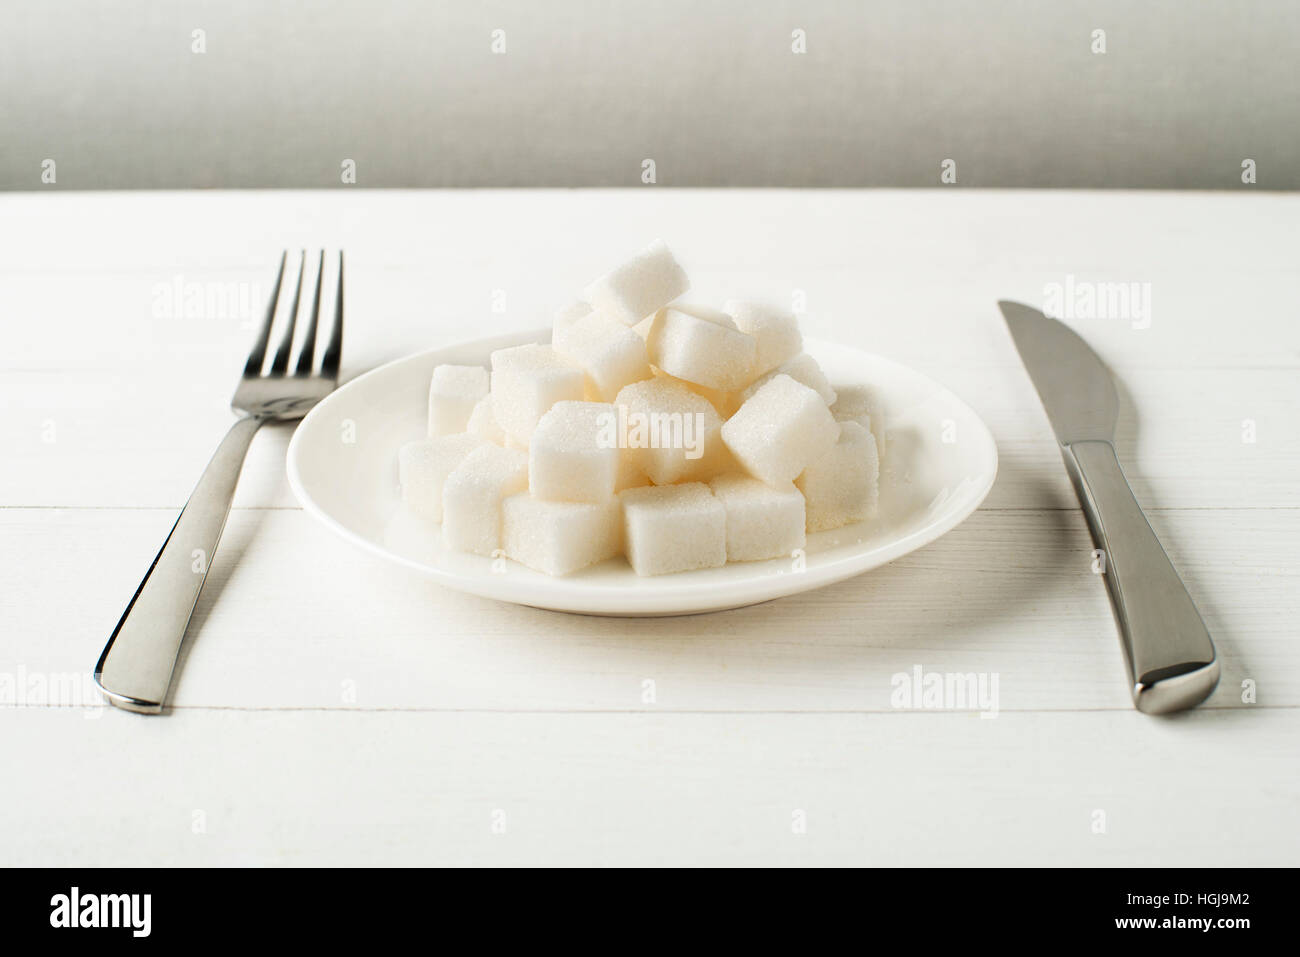 Junk-food, diet and unhealthy eating concept - close up of sugar on plate with knife and fork Stock Photo